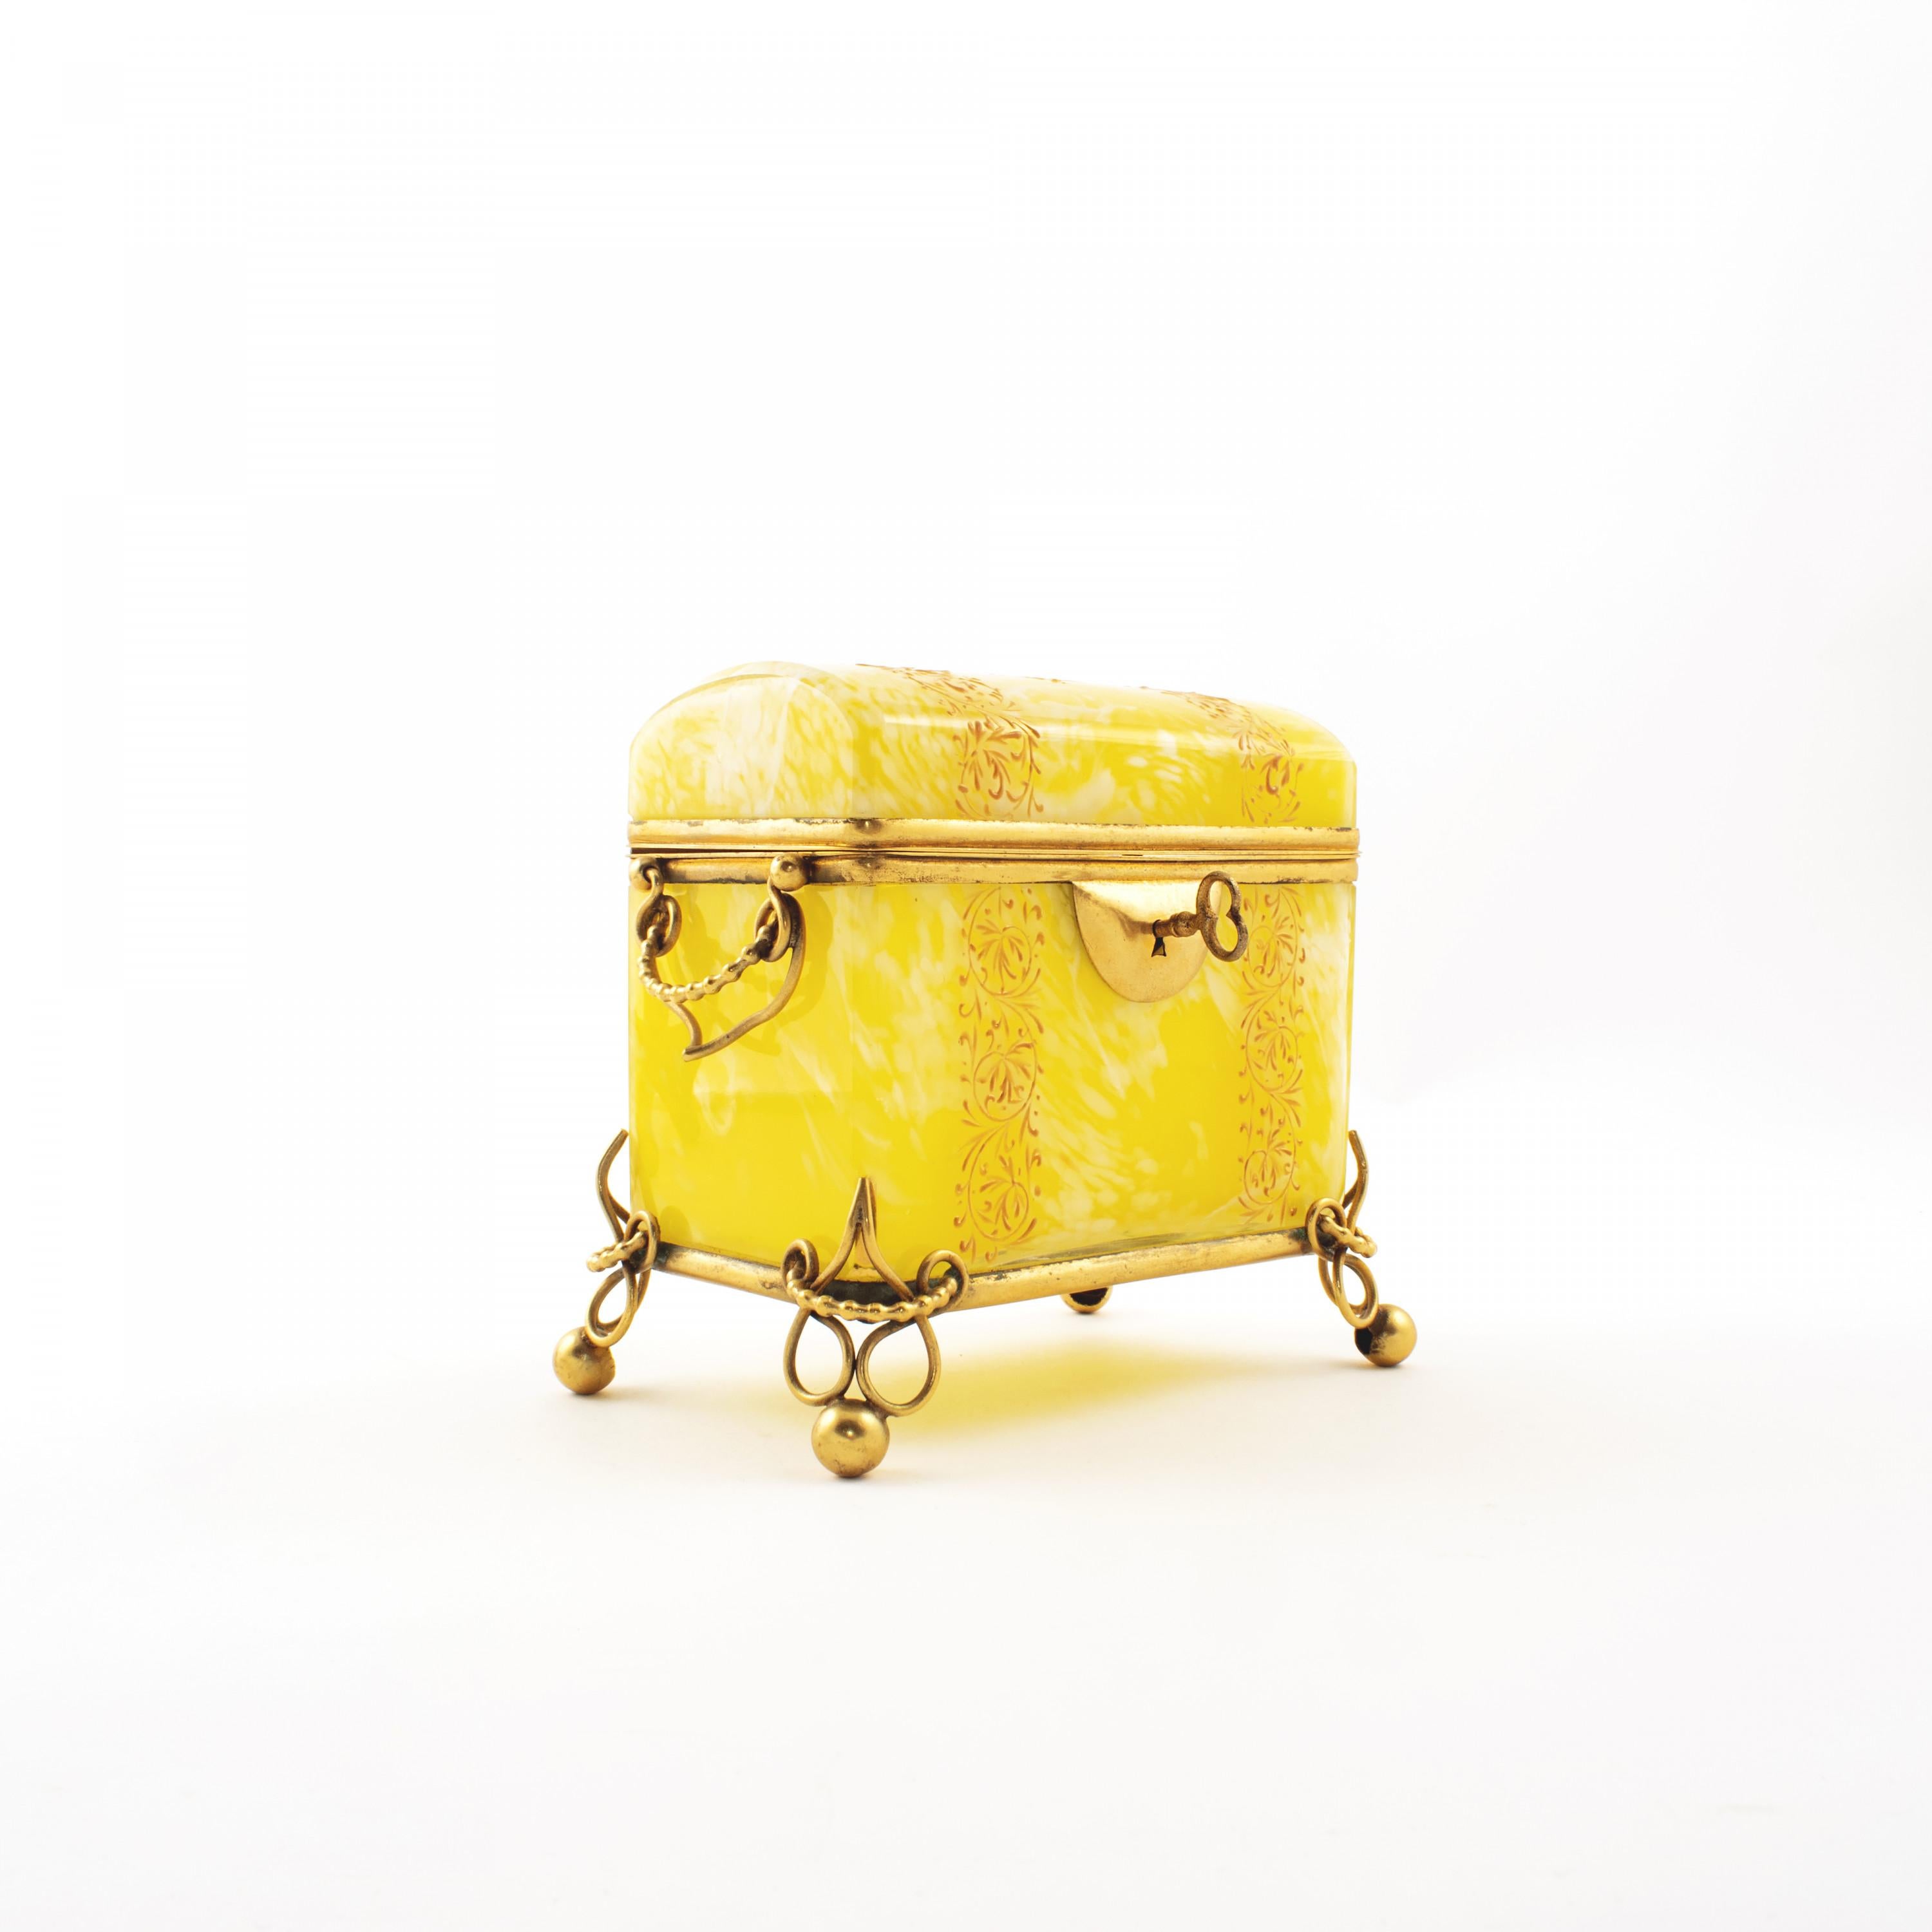 French Art Nouveau opal glass candy box with gilt bronze fittings.
France ca. 1960